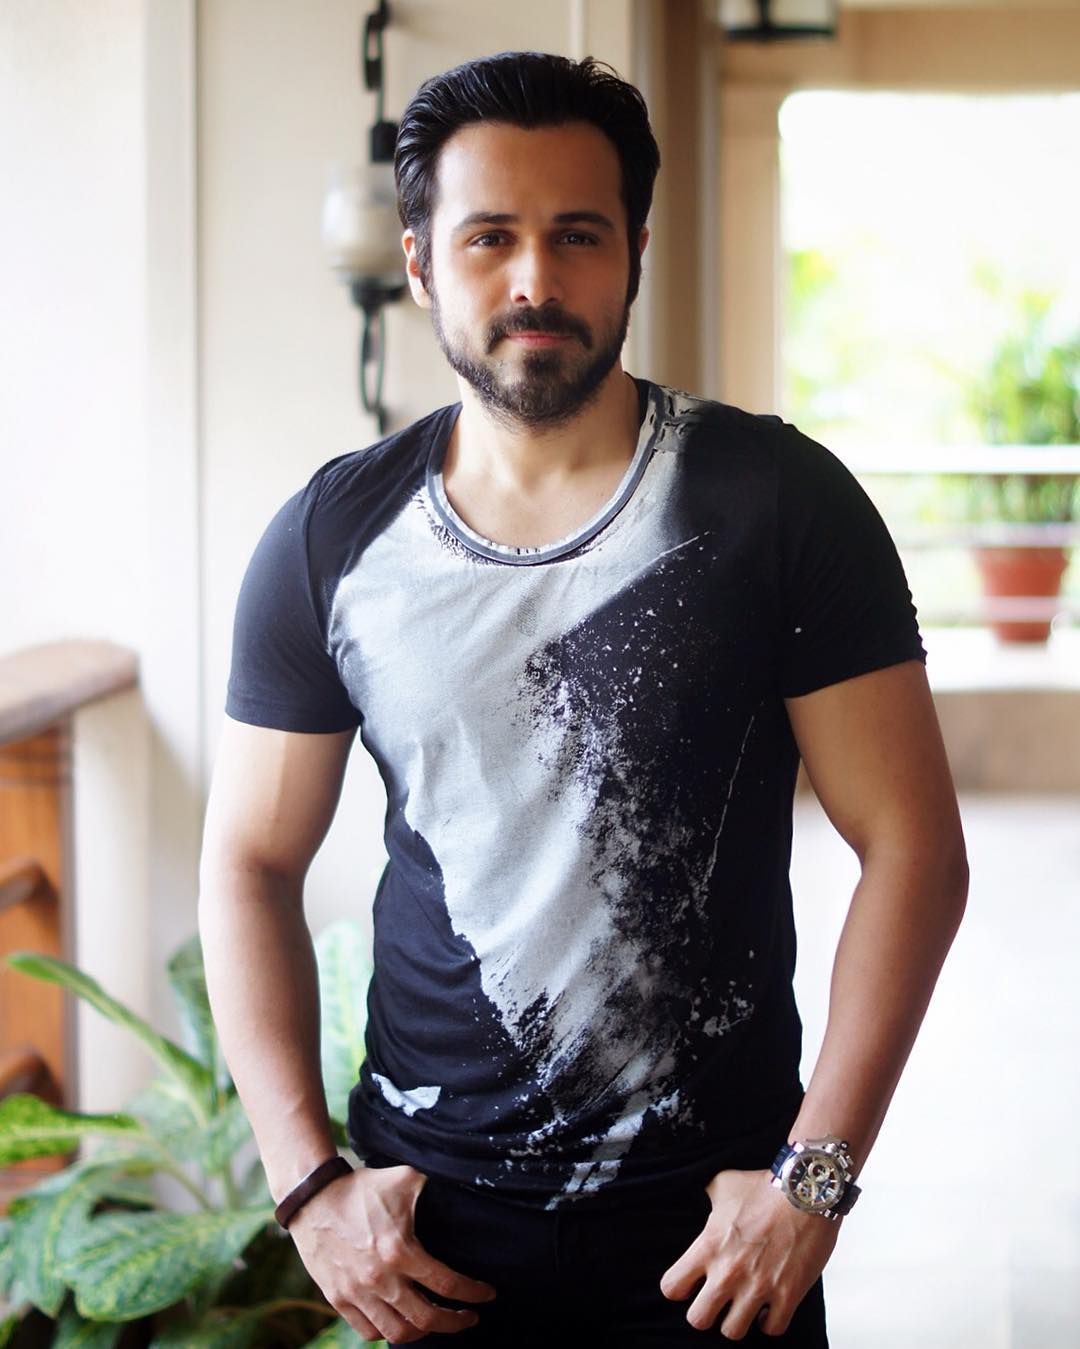 Emraan Hashmi Says People Assume The Worst From Him, Says ‘Either I'm In A Gangster Flick Or Doing Some Horrendous Act’